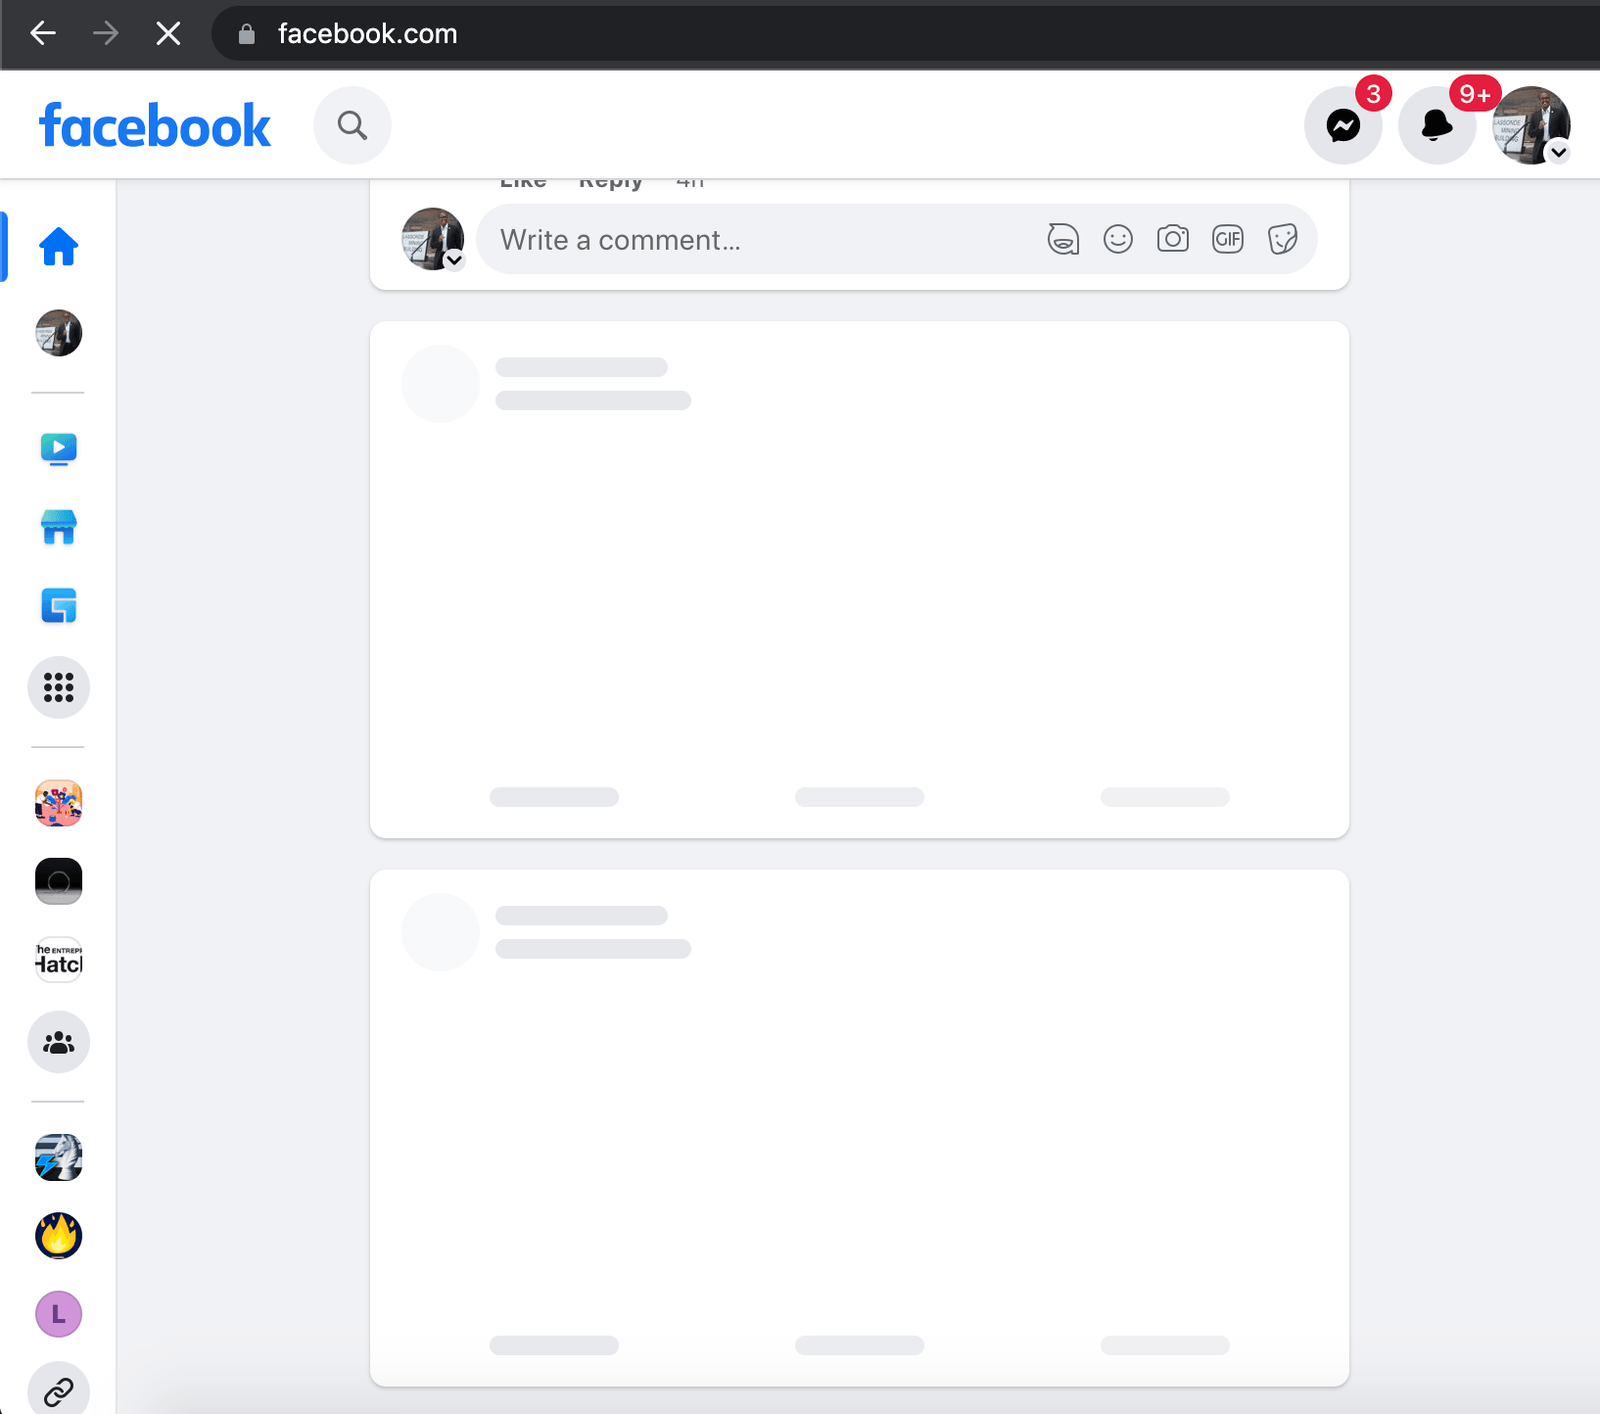 Facebook feed skeleton UI has white cards with gray bars to indicate  rough layout once loaded